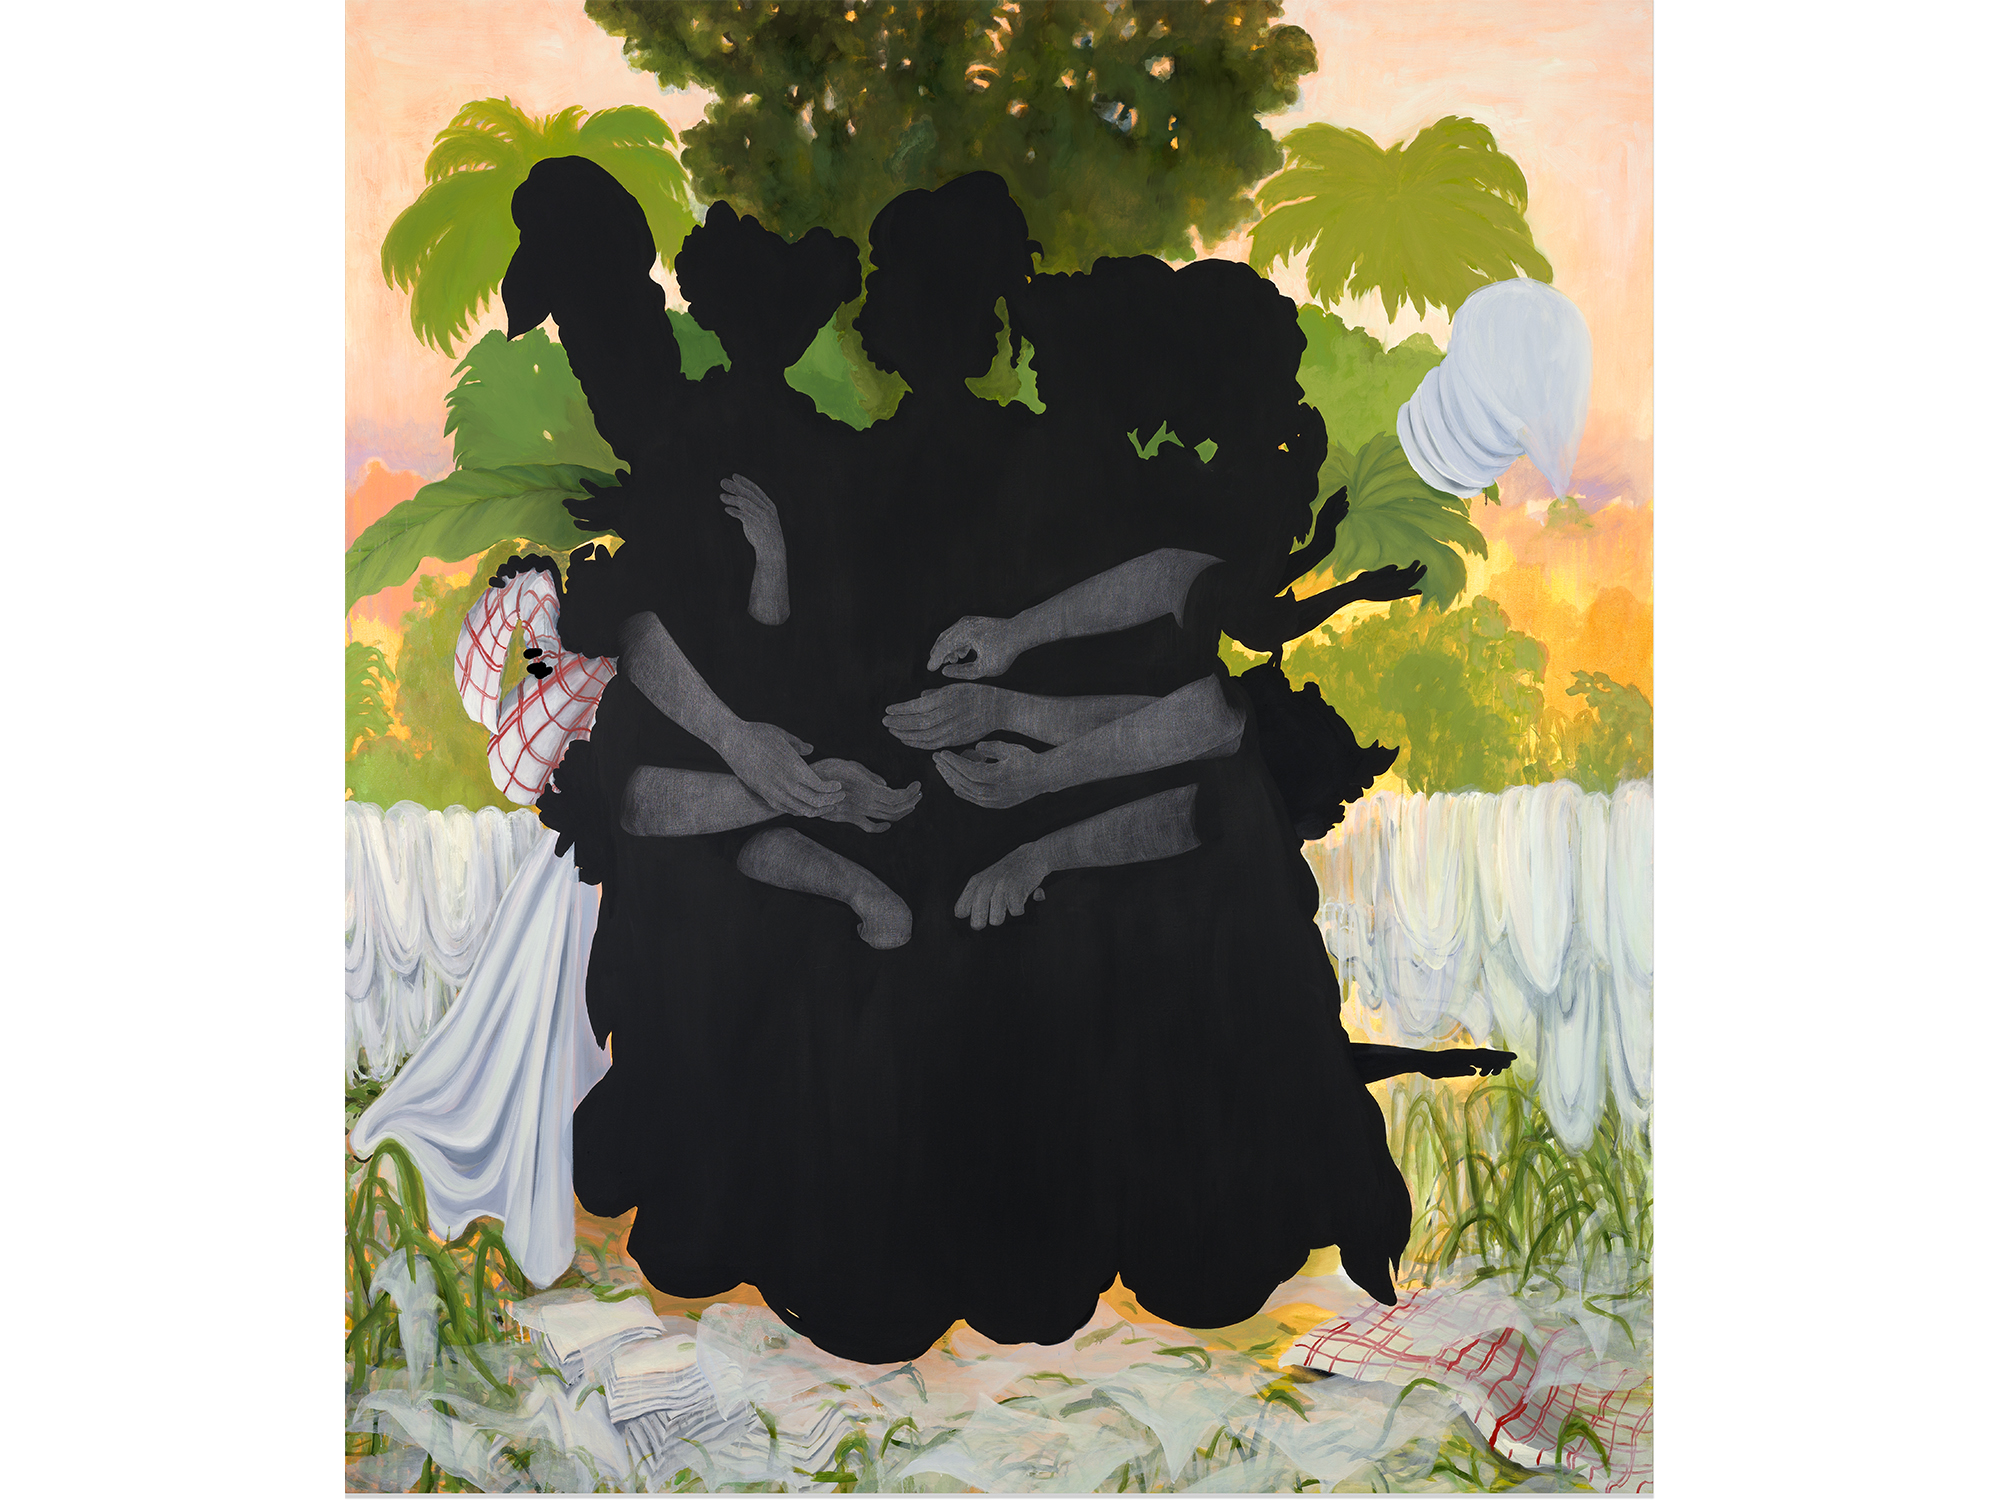 Abstract collage of black sillhouette of people with outlines of their heads and gray arms embracing the black shape